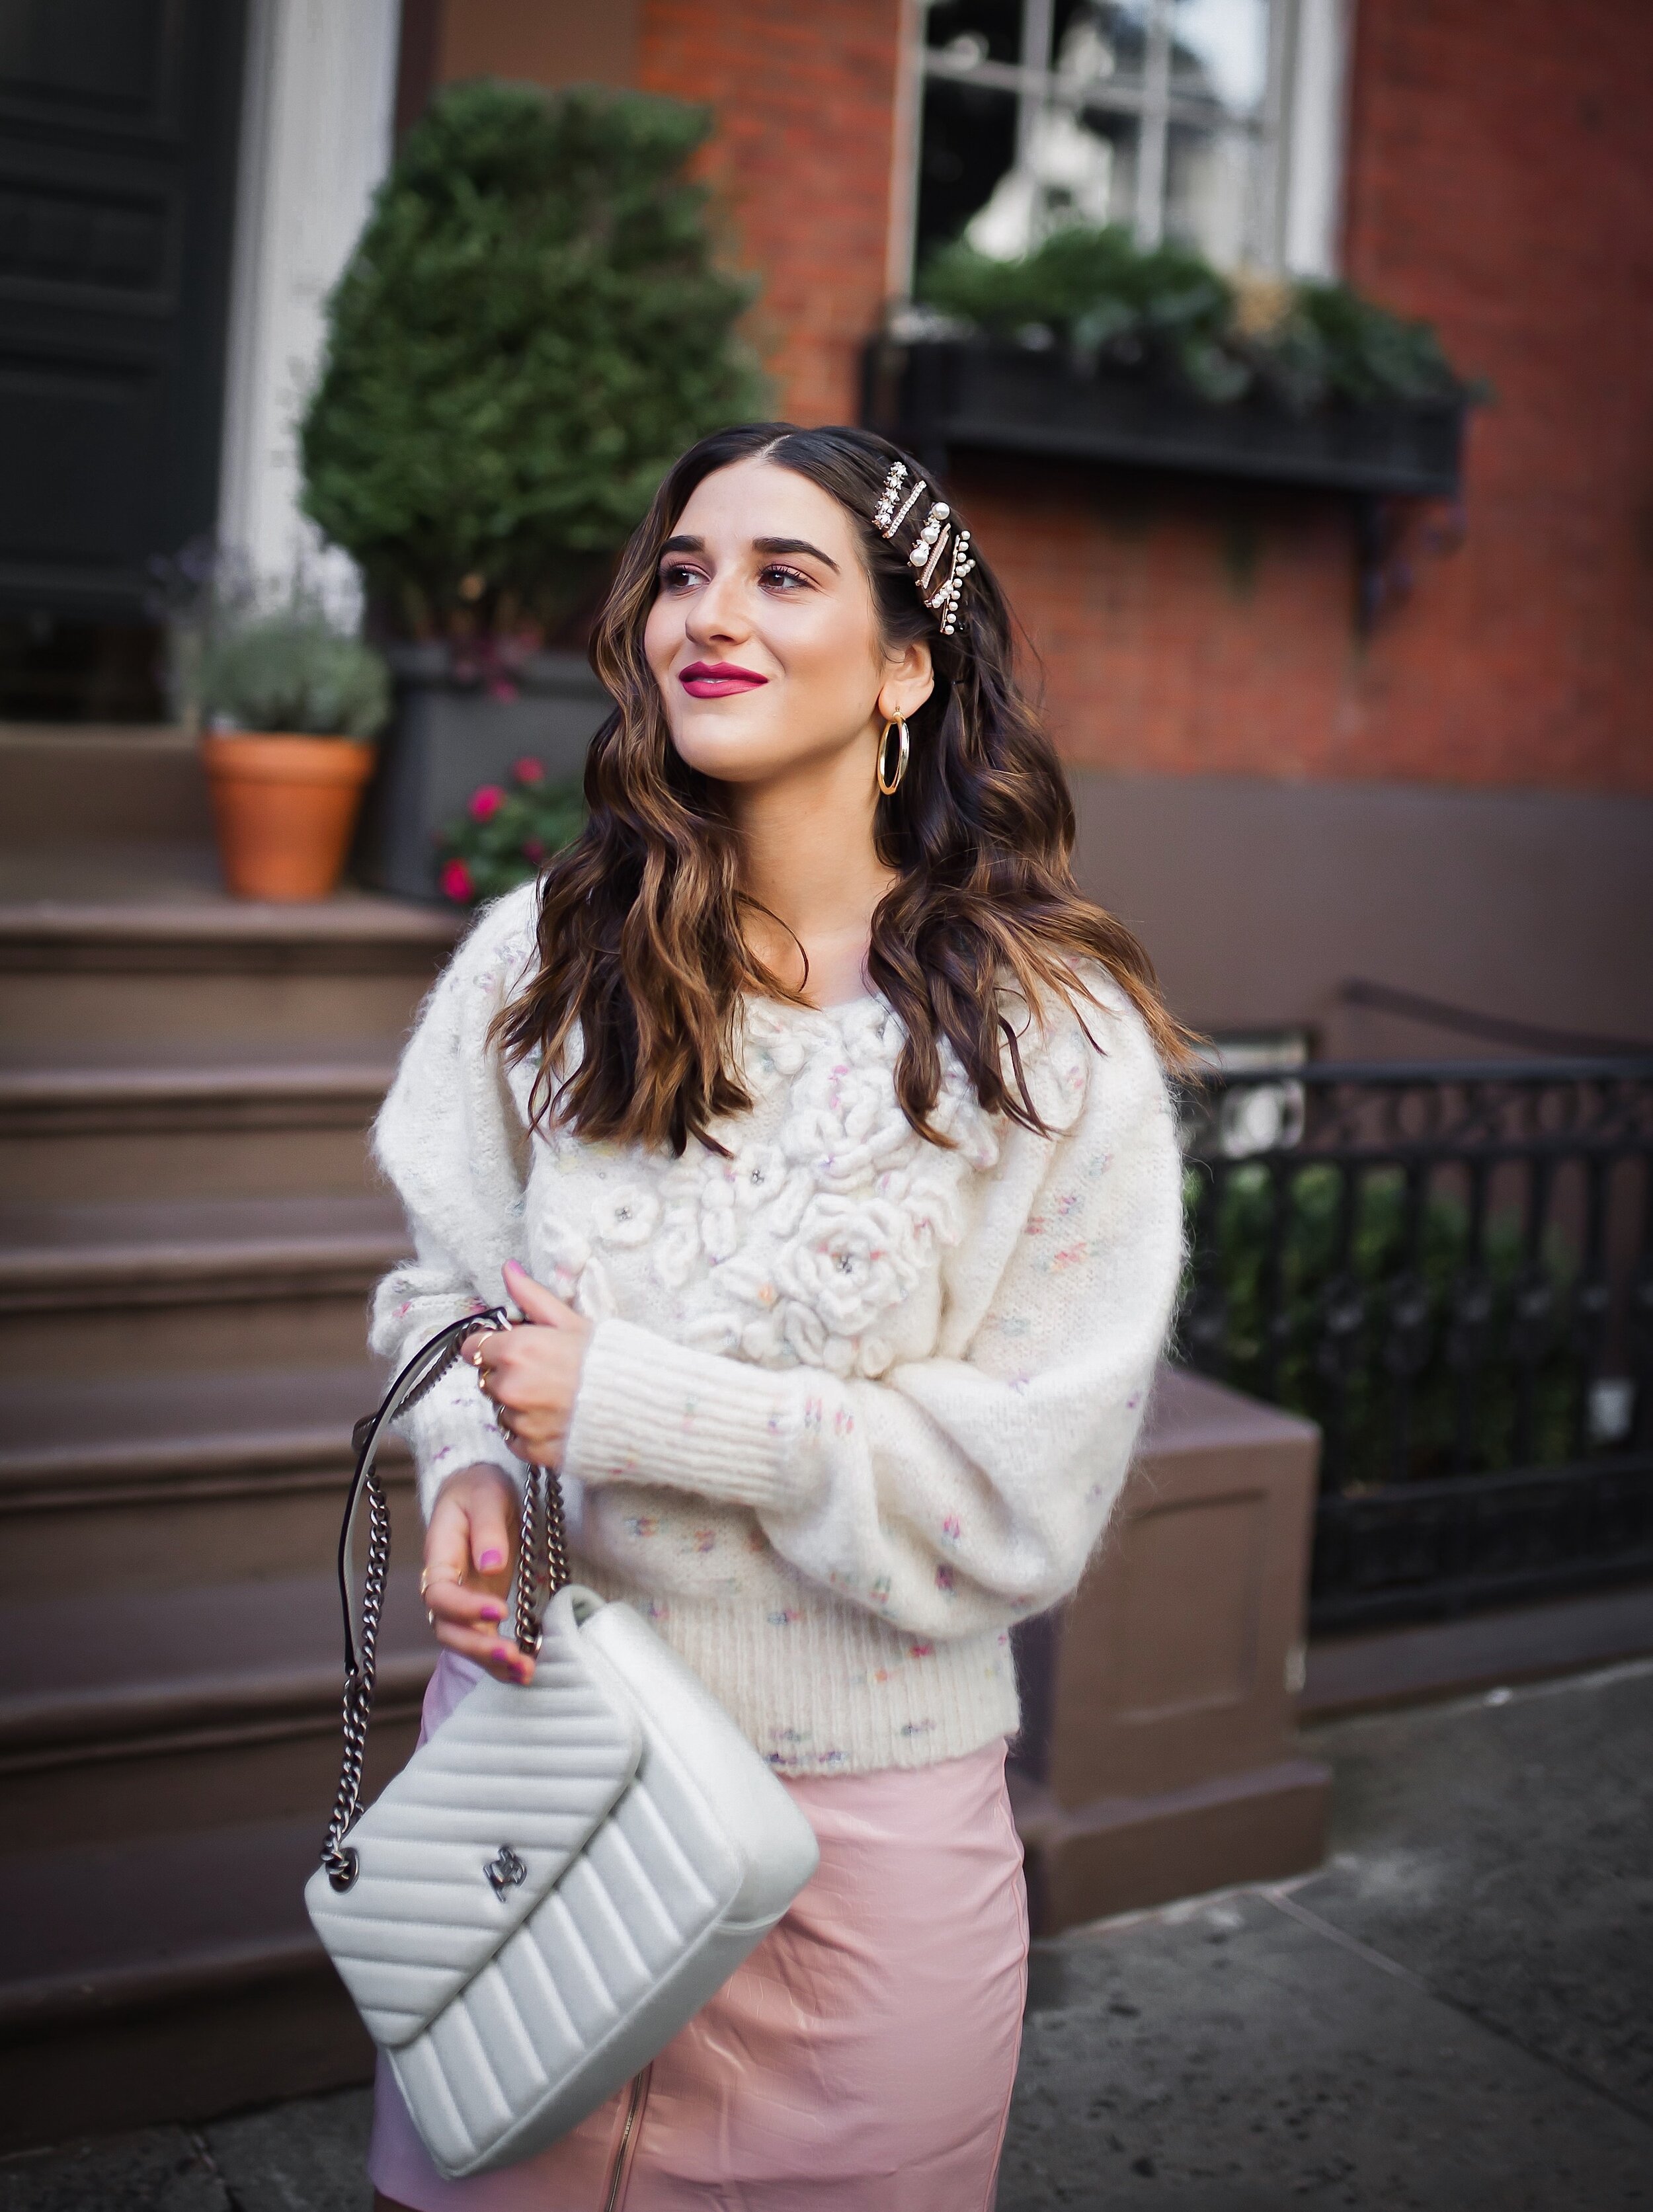 We Always Adapt Floral Embroidered Cream Sweater Pink Zipper Skirt Esther Santer Fashion Blog NYC Street Style Blogger Outfit OOTD Trendy Shopping Girl What How To  Wear West Village Photoshoot Inspo Ideas Fall Winter Accessories Pins Clips Gold Hoops.JPG